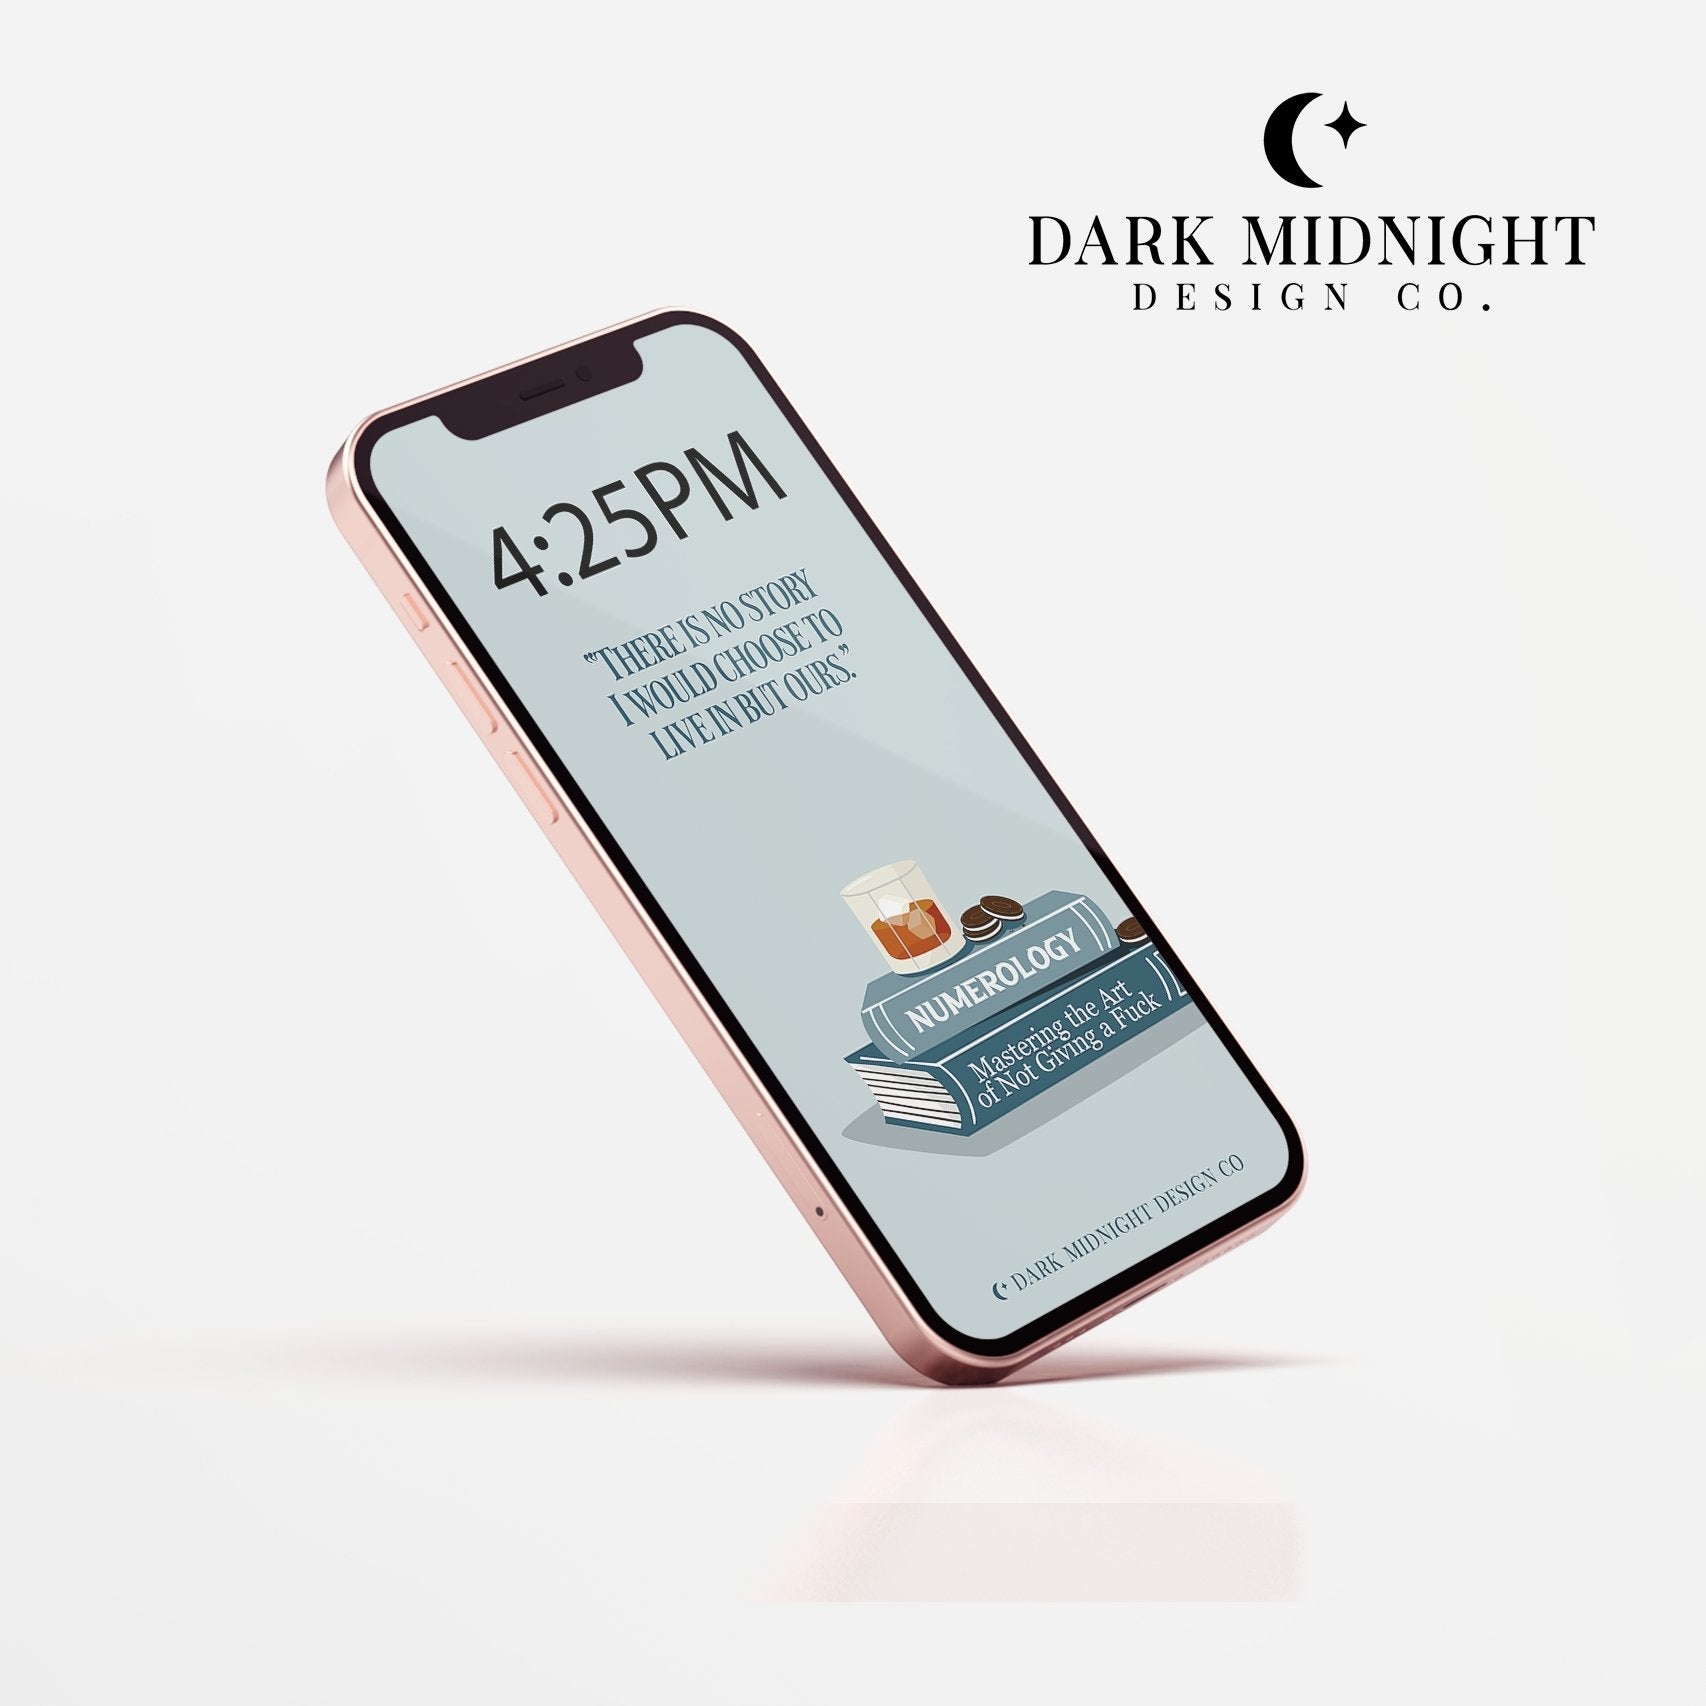 Character Anthology Phone Wallpaper - Lance Orion - Officially Licensed Zodiac Academy Phone Wallpaper - Dark Midnight Design Co